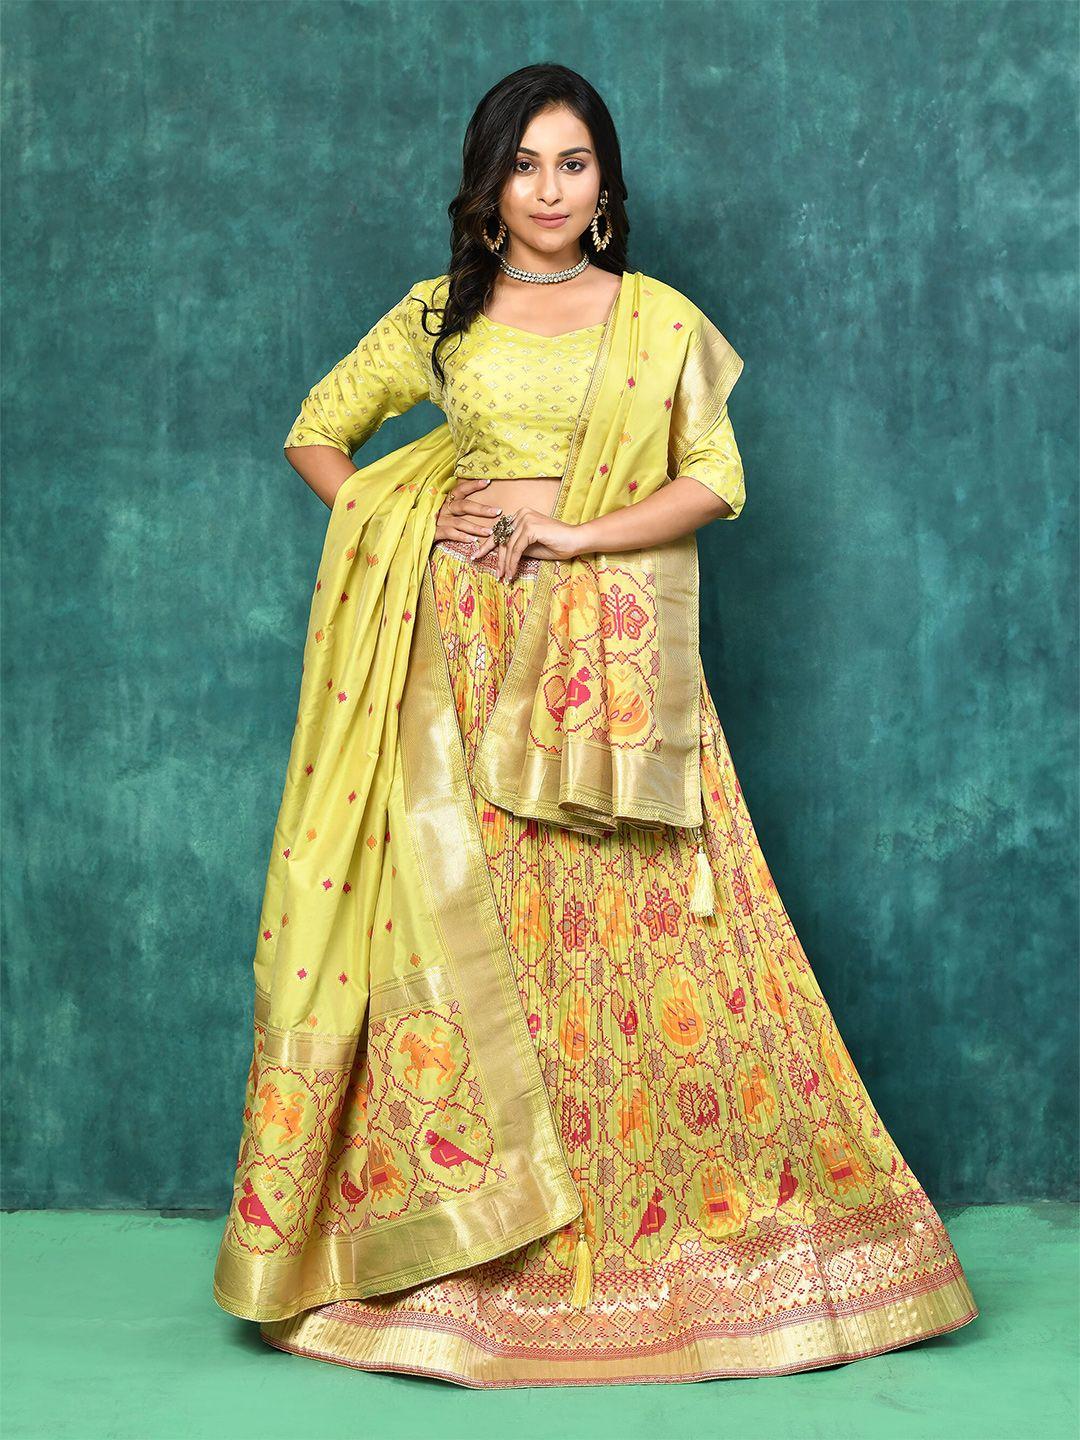 elora Foil Print Ready to Wear Lehenga & Unstitched Blouse With Dupatta